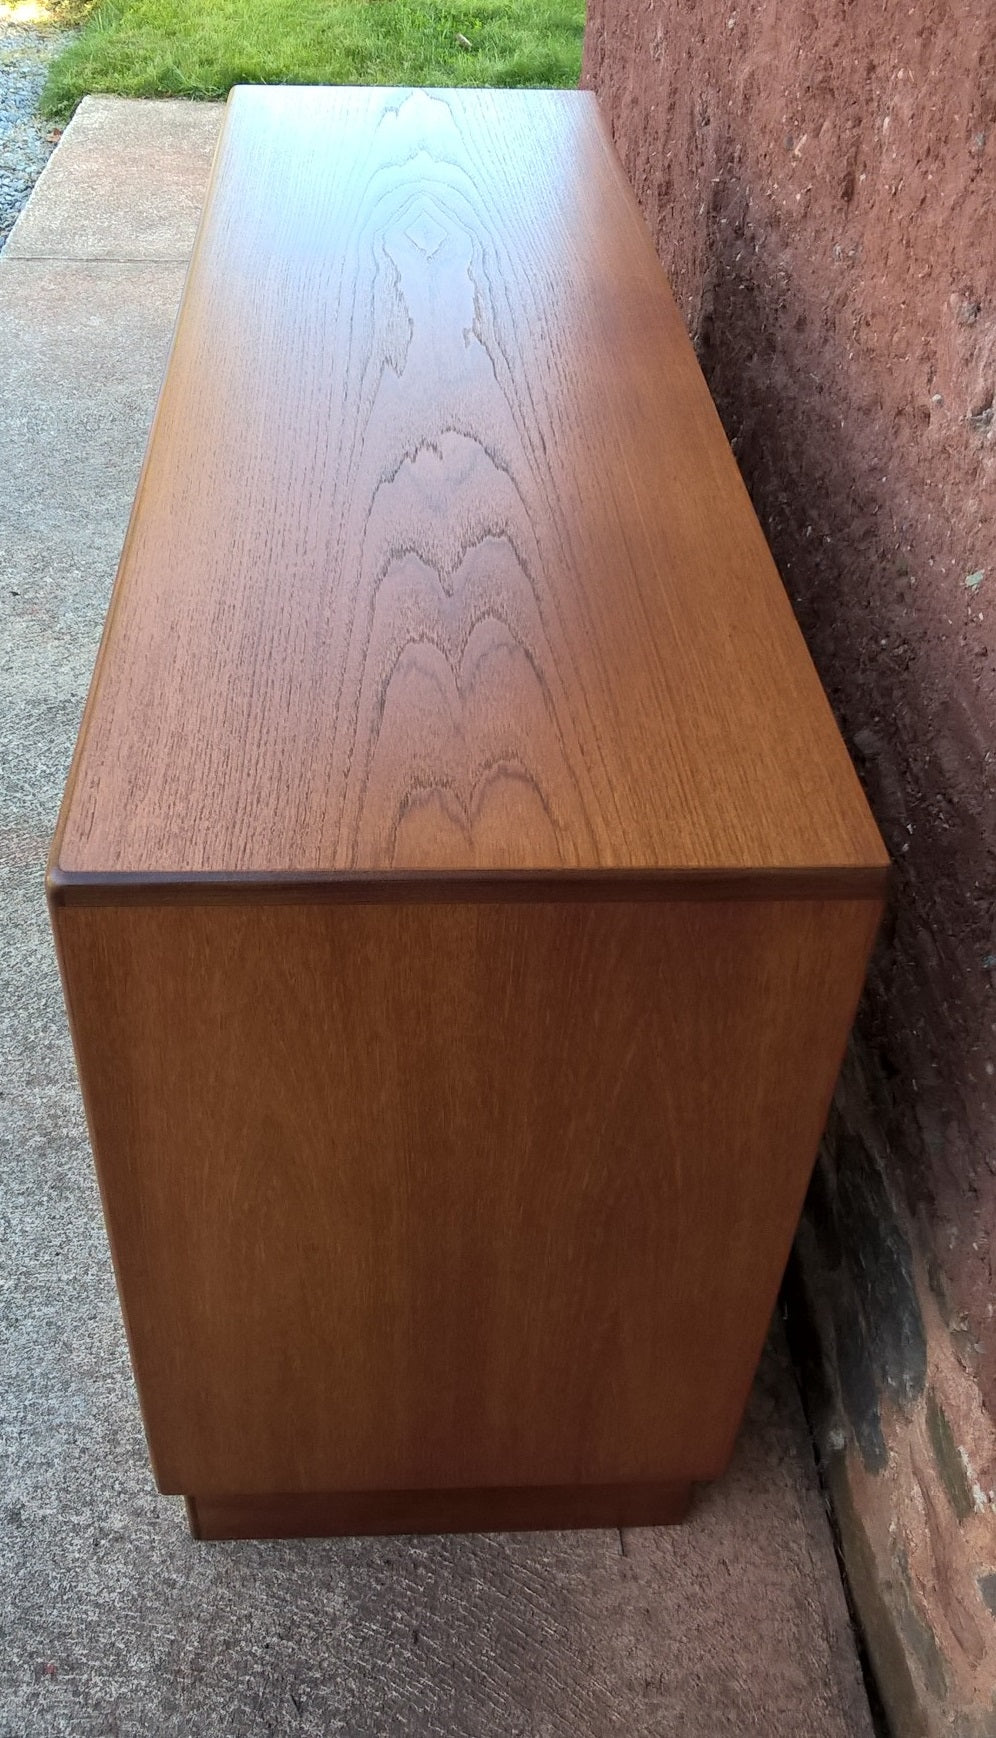 Retro Teak Chest Of Drawers By G Plan / Teak Chest of 8 Drawers